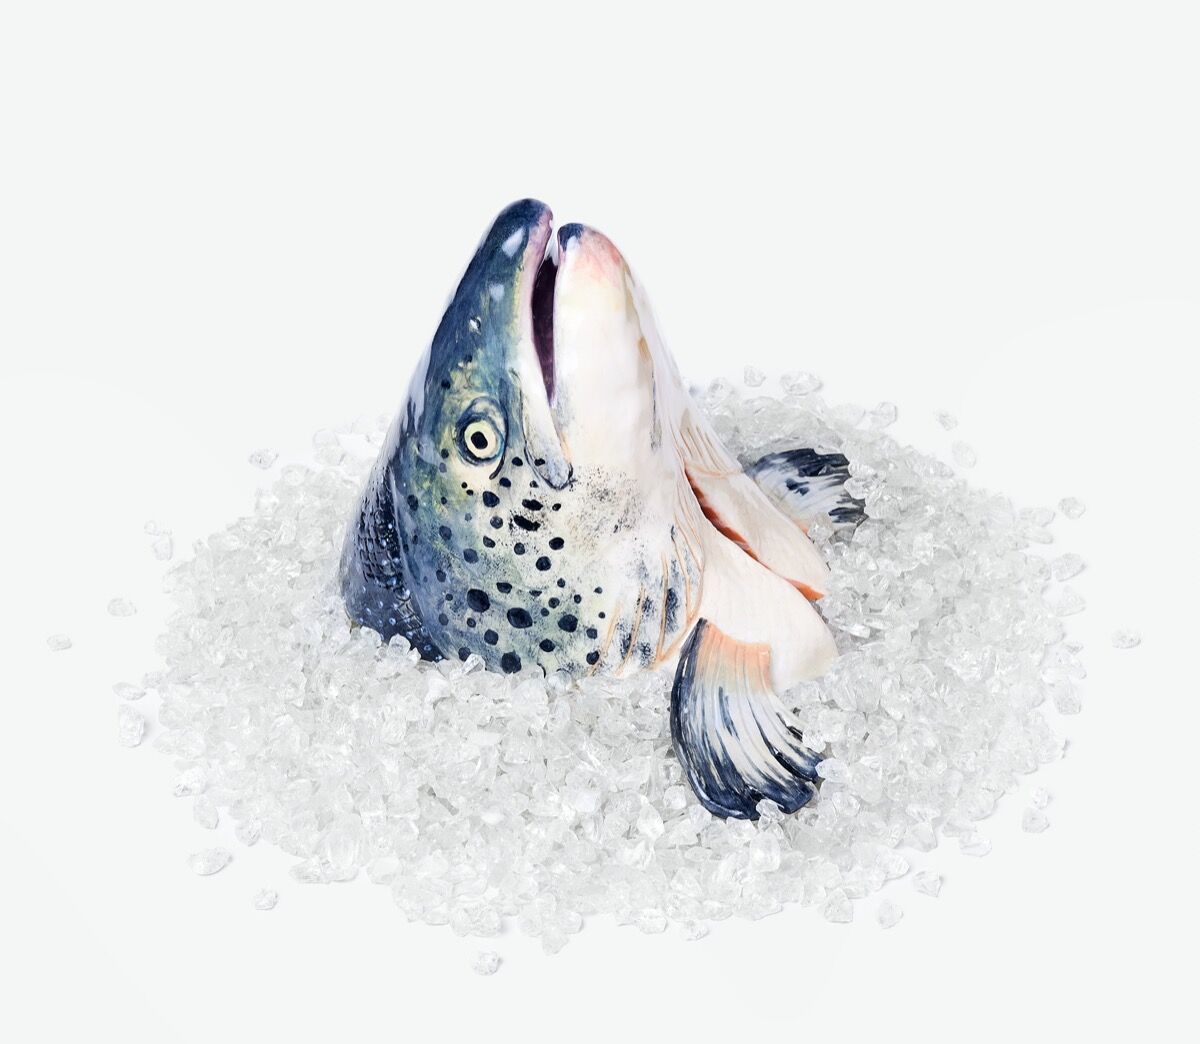 Stephanie H. Shih, Salmon Head on Ice, 2021. Photo by Robert Bredvad. Courtesy of the artist and Dinner Gallery.